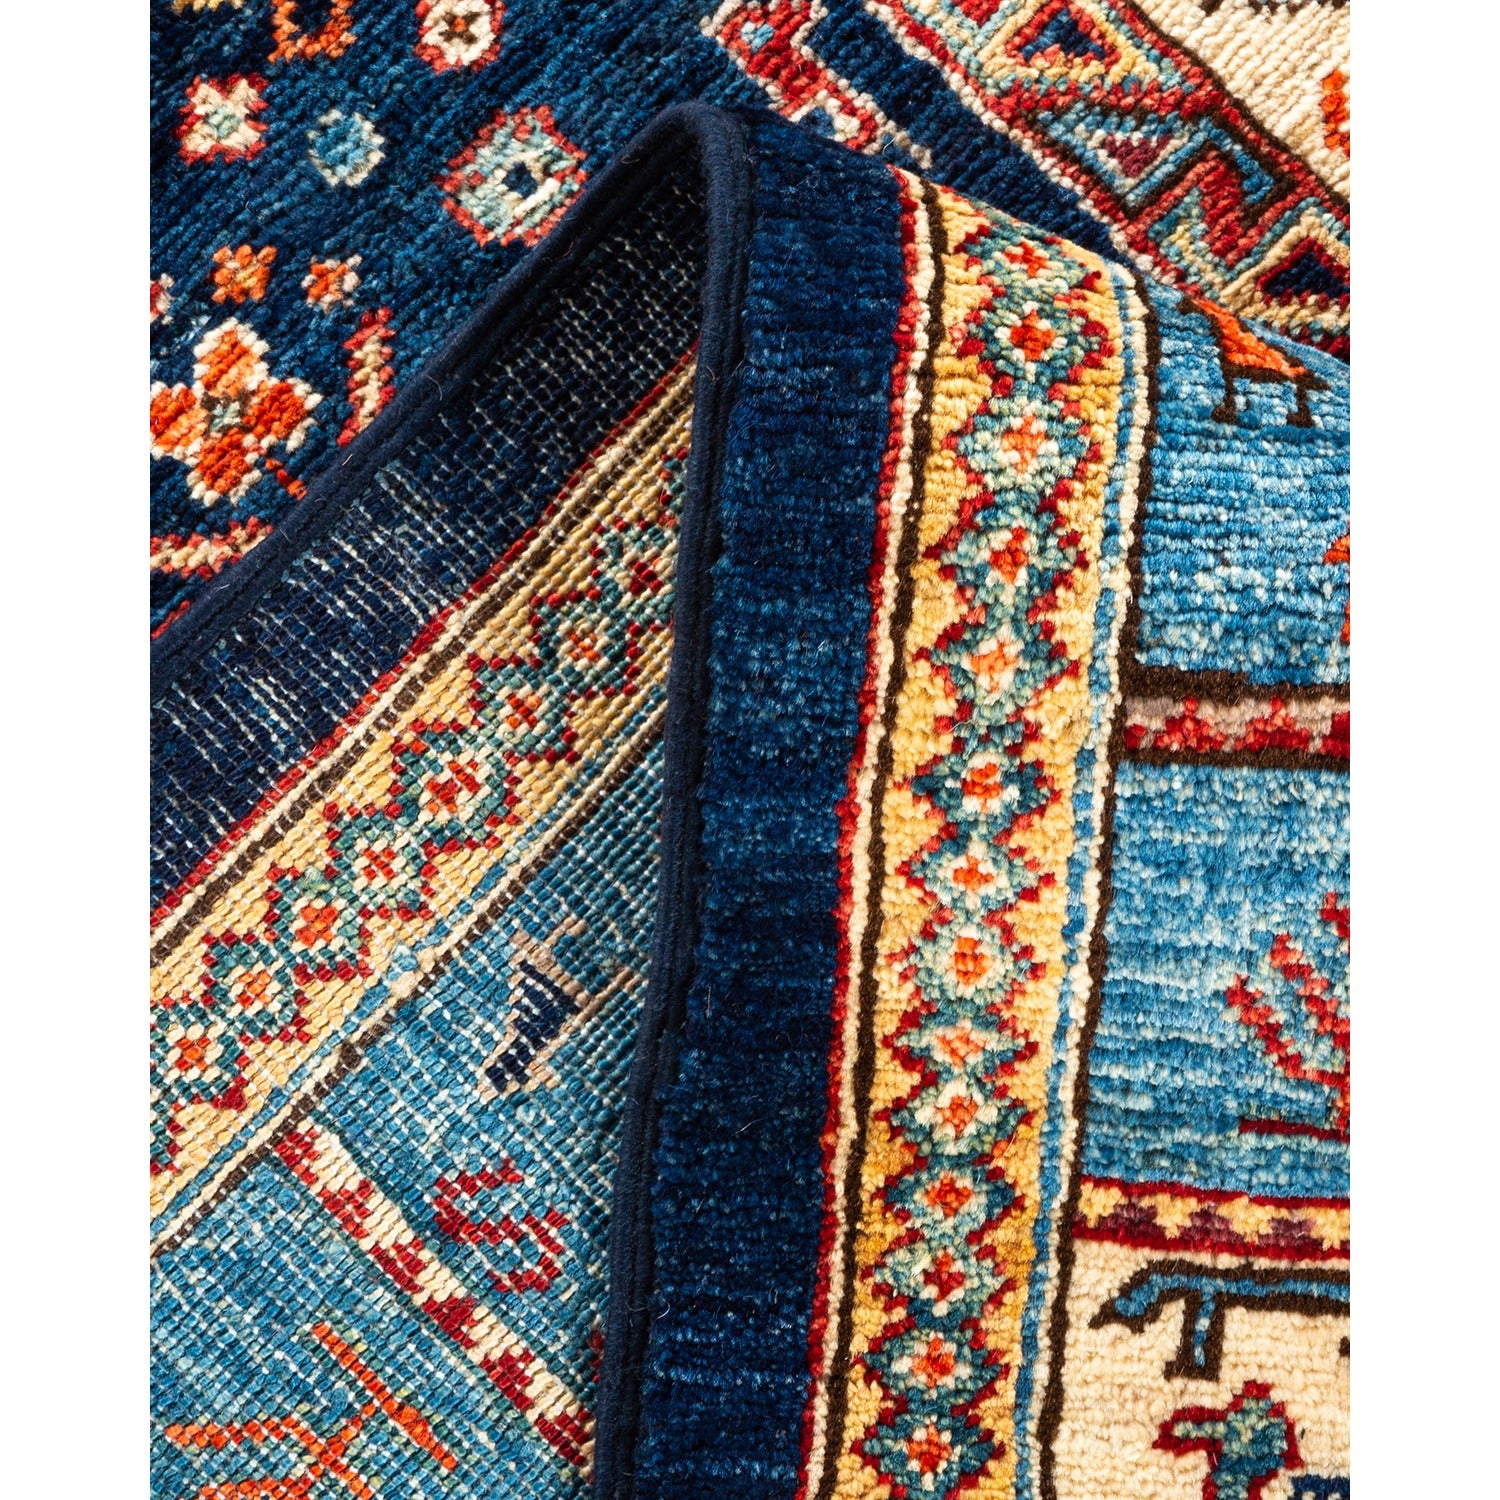 Intricately designed traditional woven rug showcasing vibrant colors and tight weave.